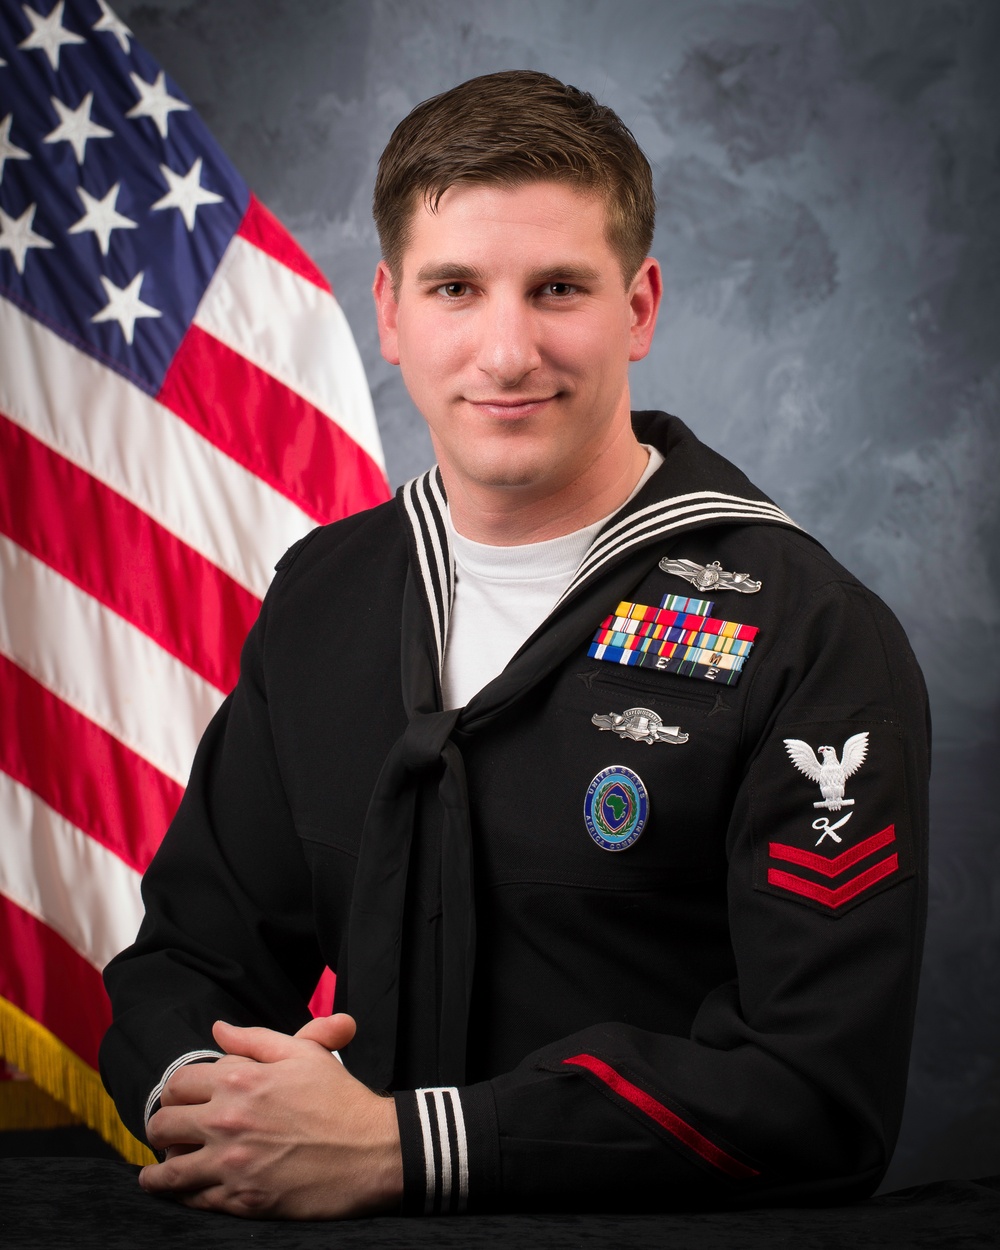 Official portrait, Intelligence Specialist 2nd Class Travis J. Benson, United States Naval Reserve